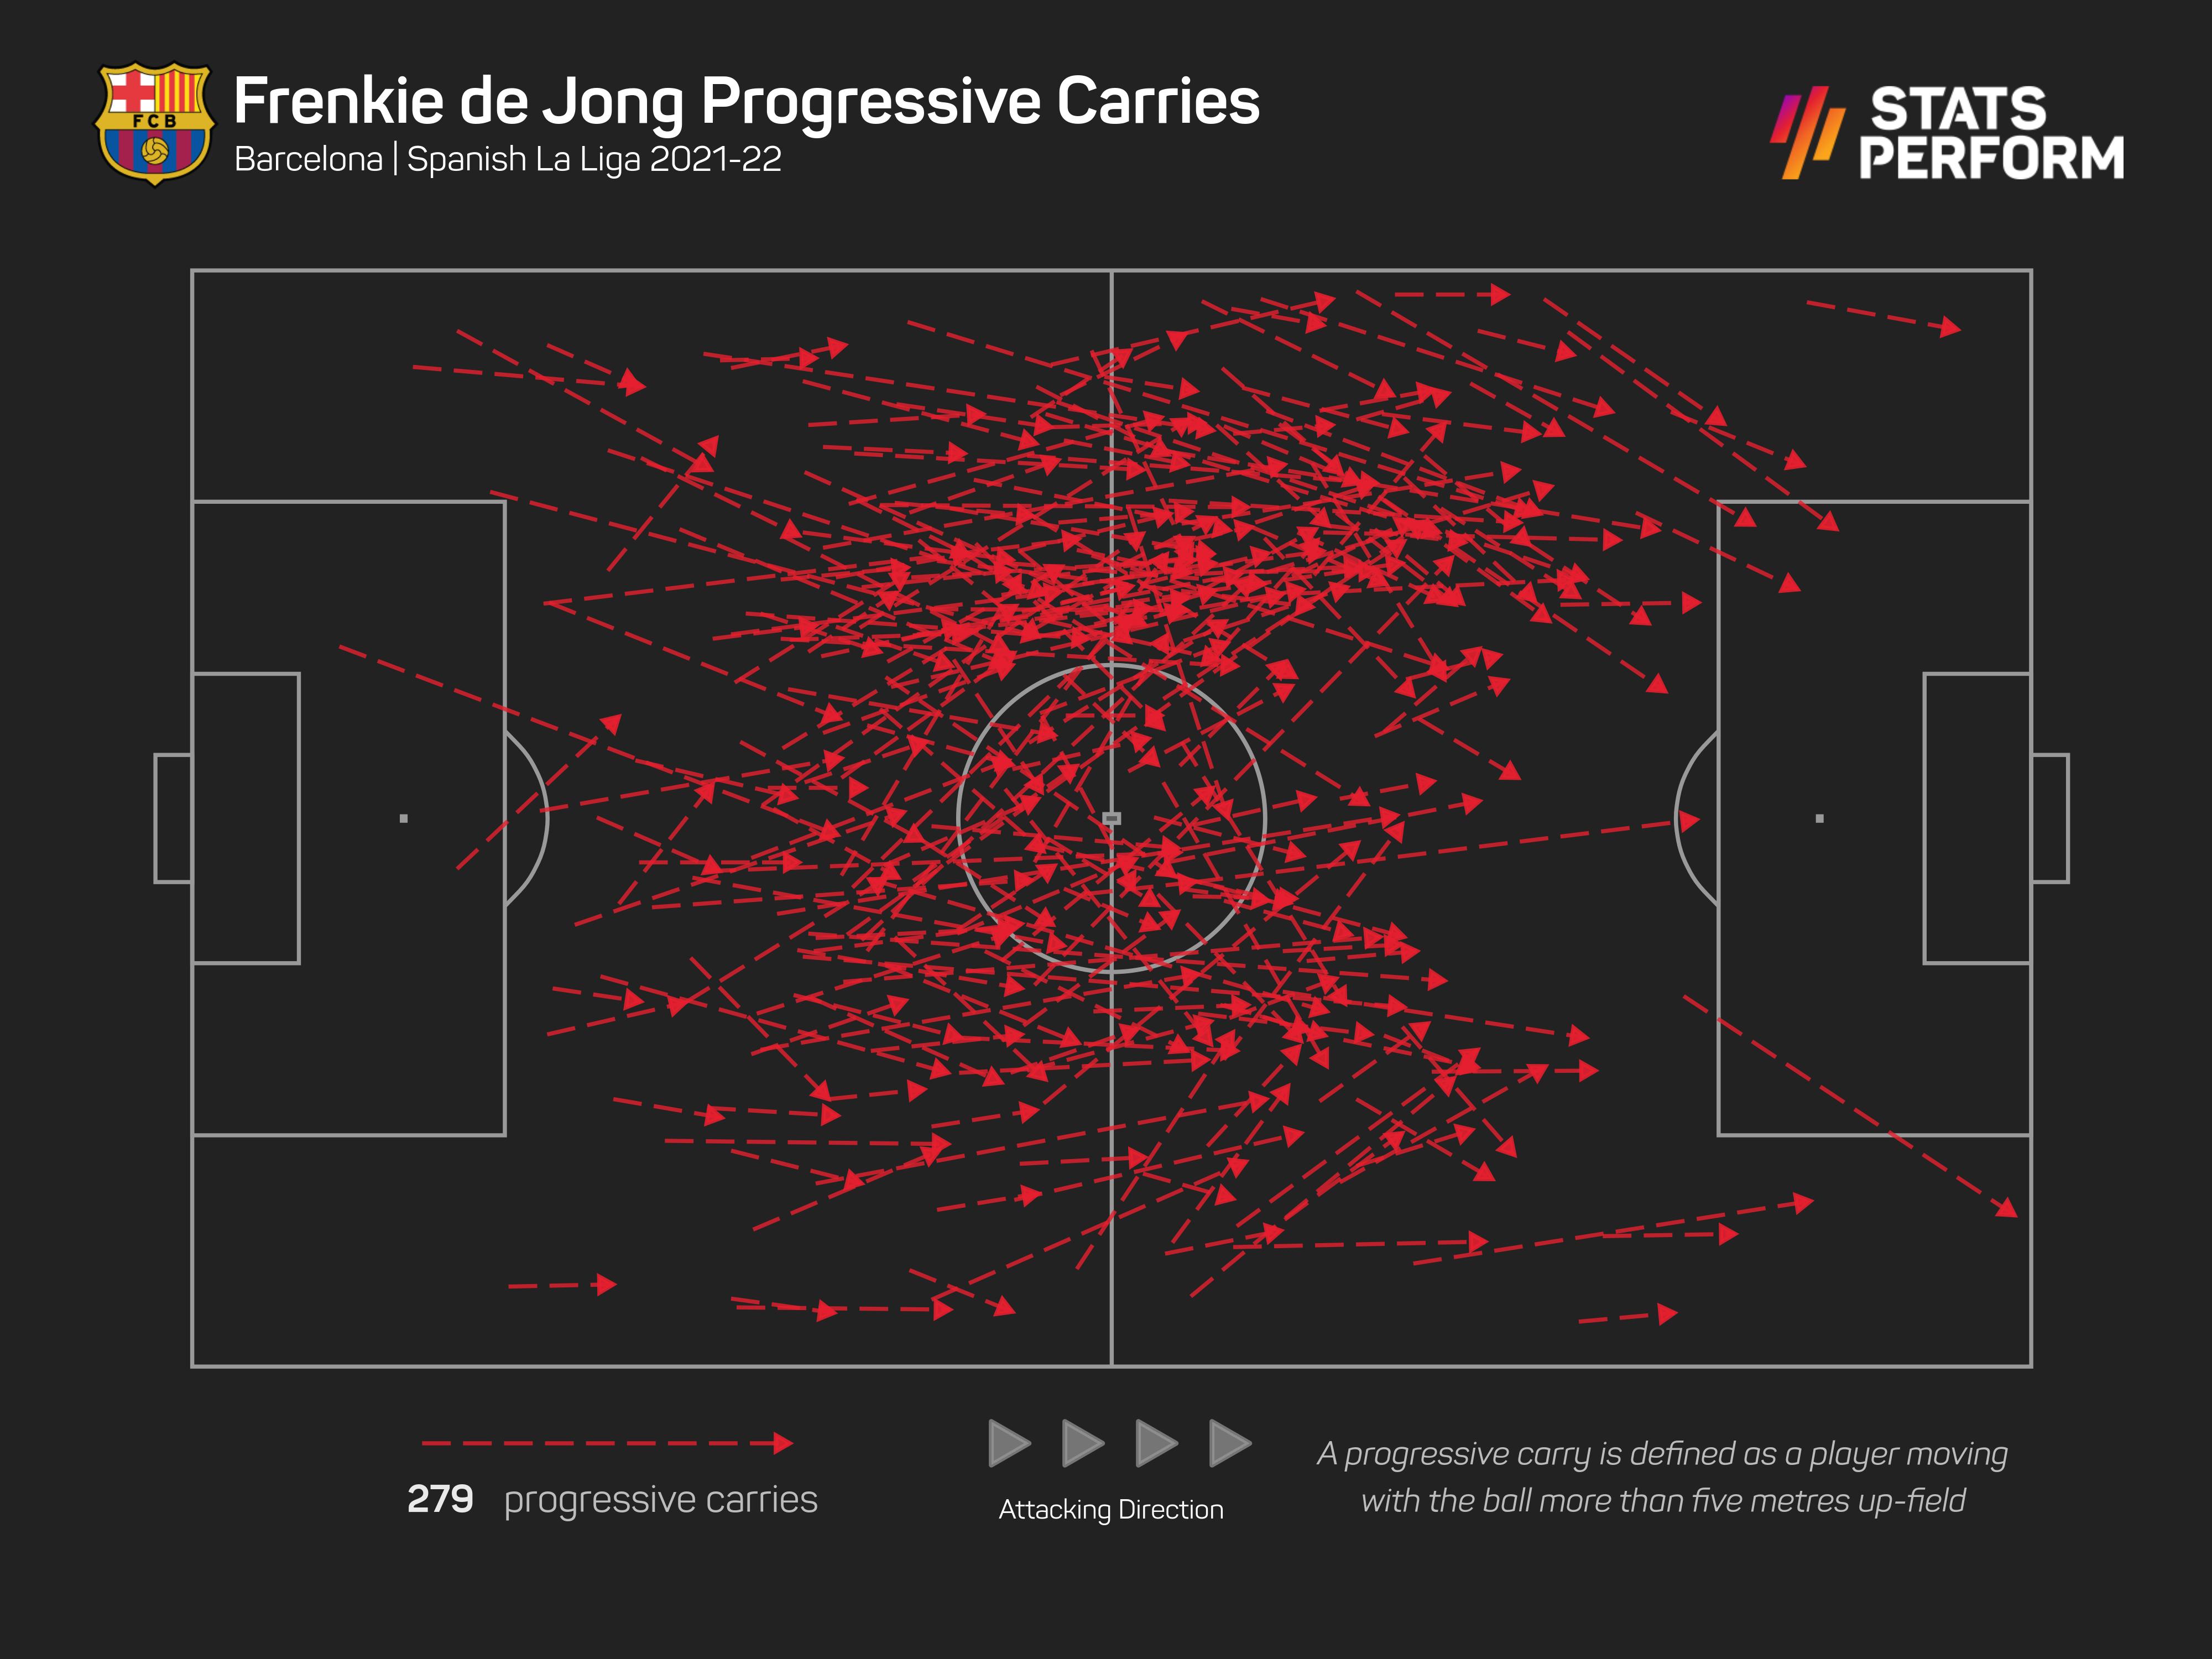 De Jong's ability to carry the ball would be a huge boost to United's midfield